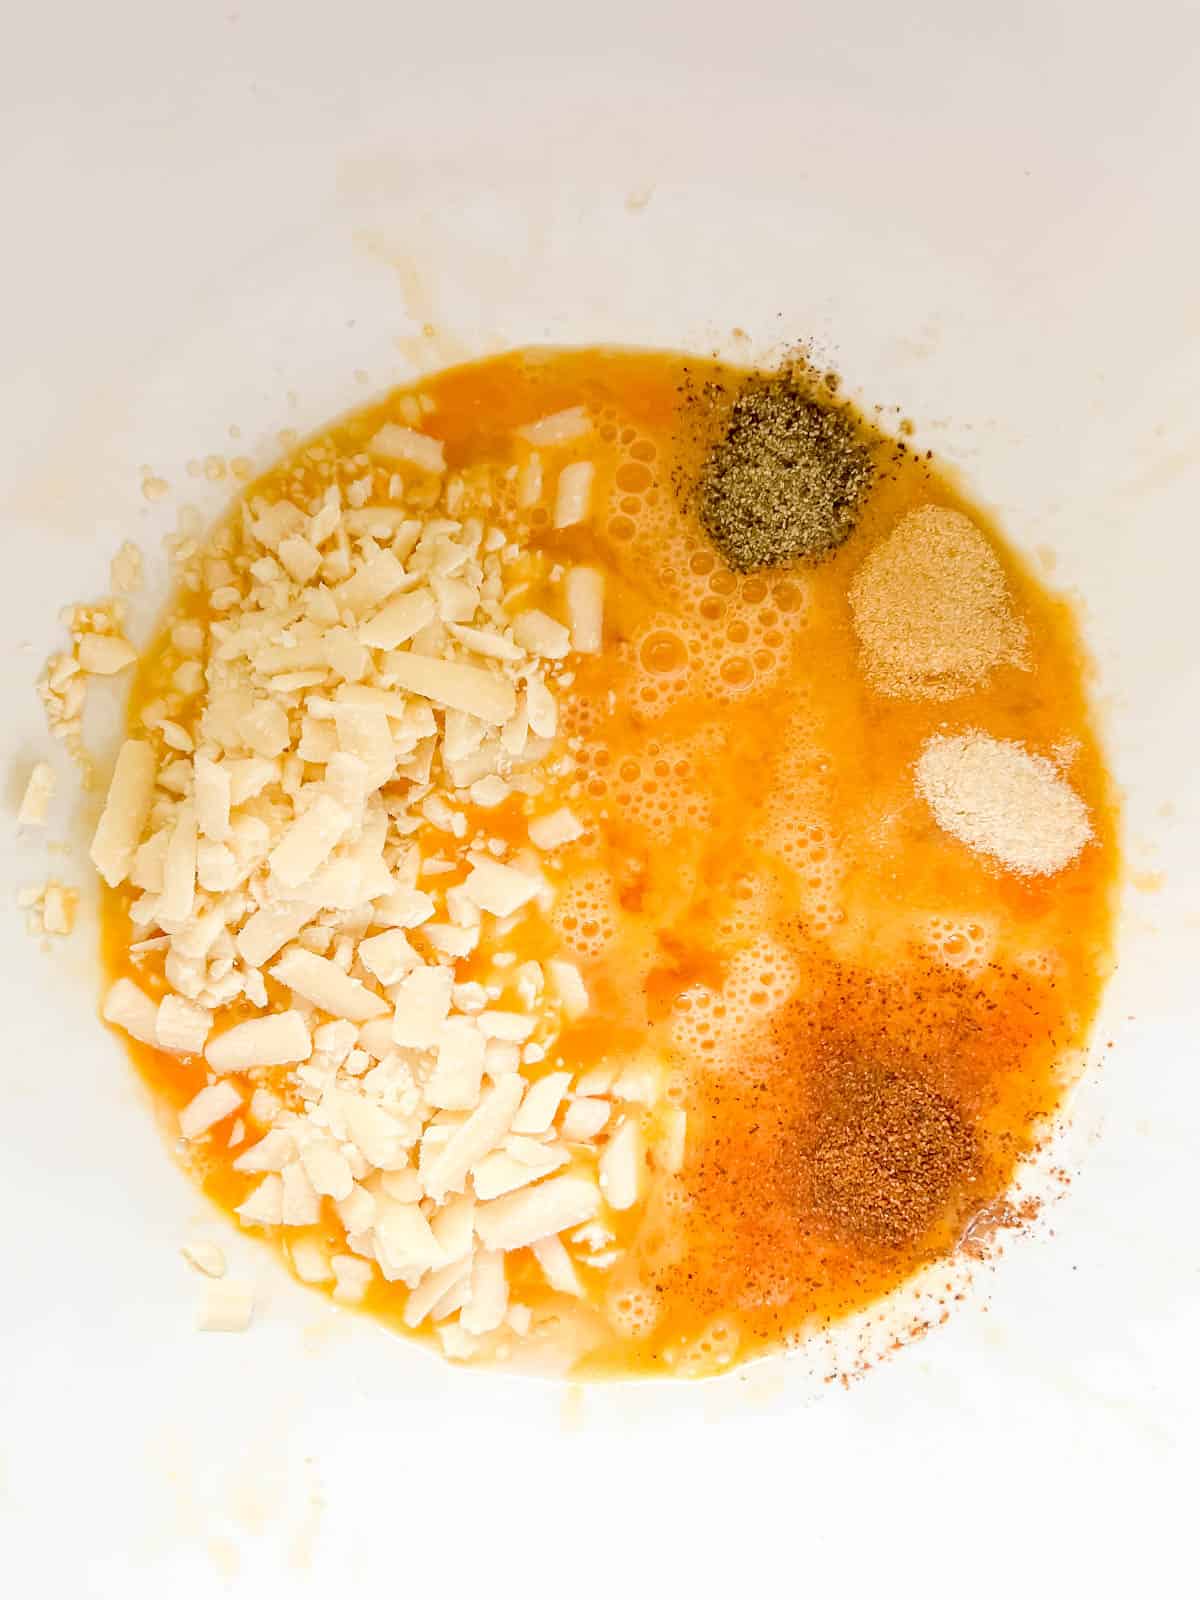 Spices added to eggs in a bowl.